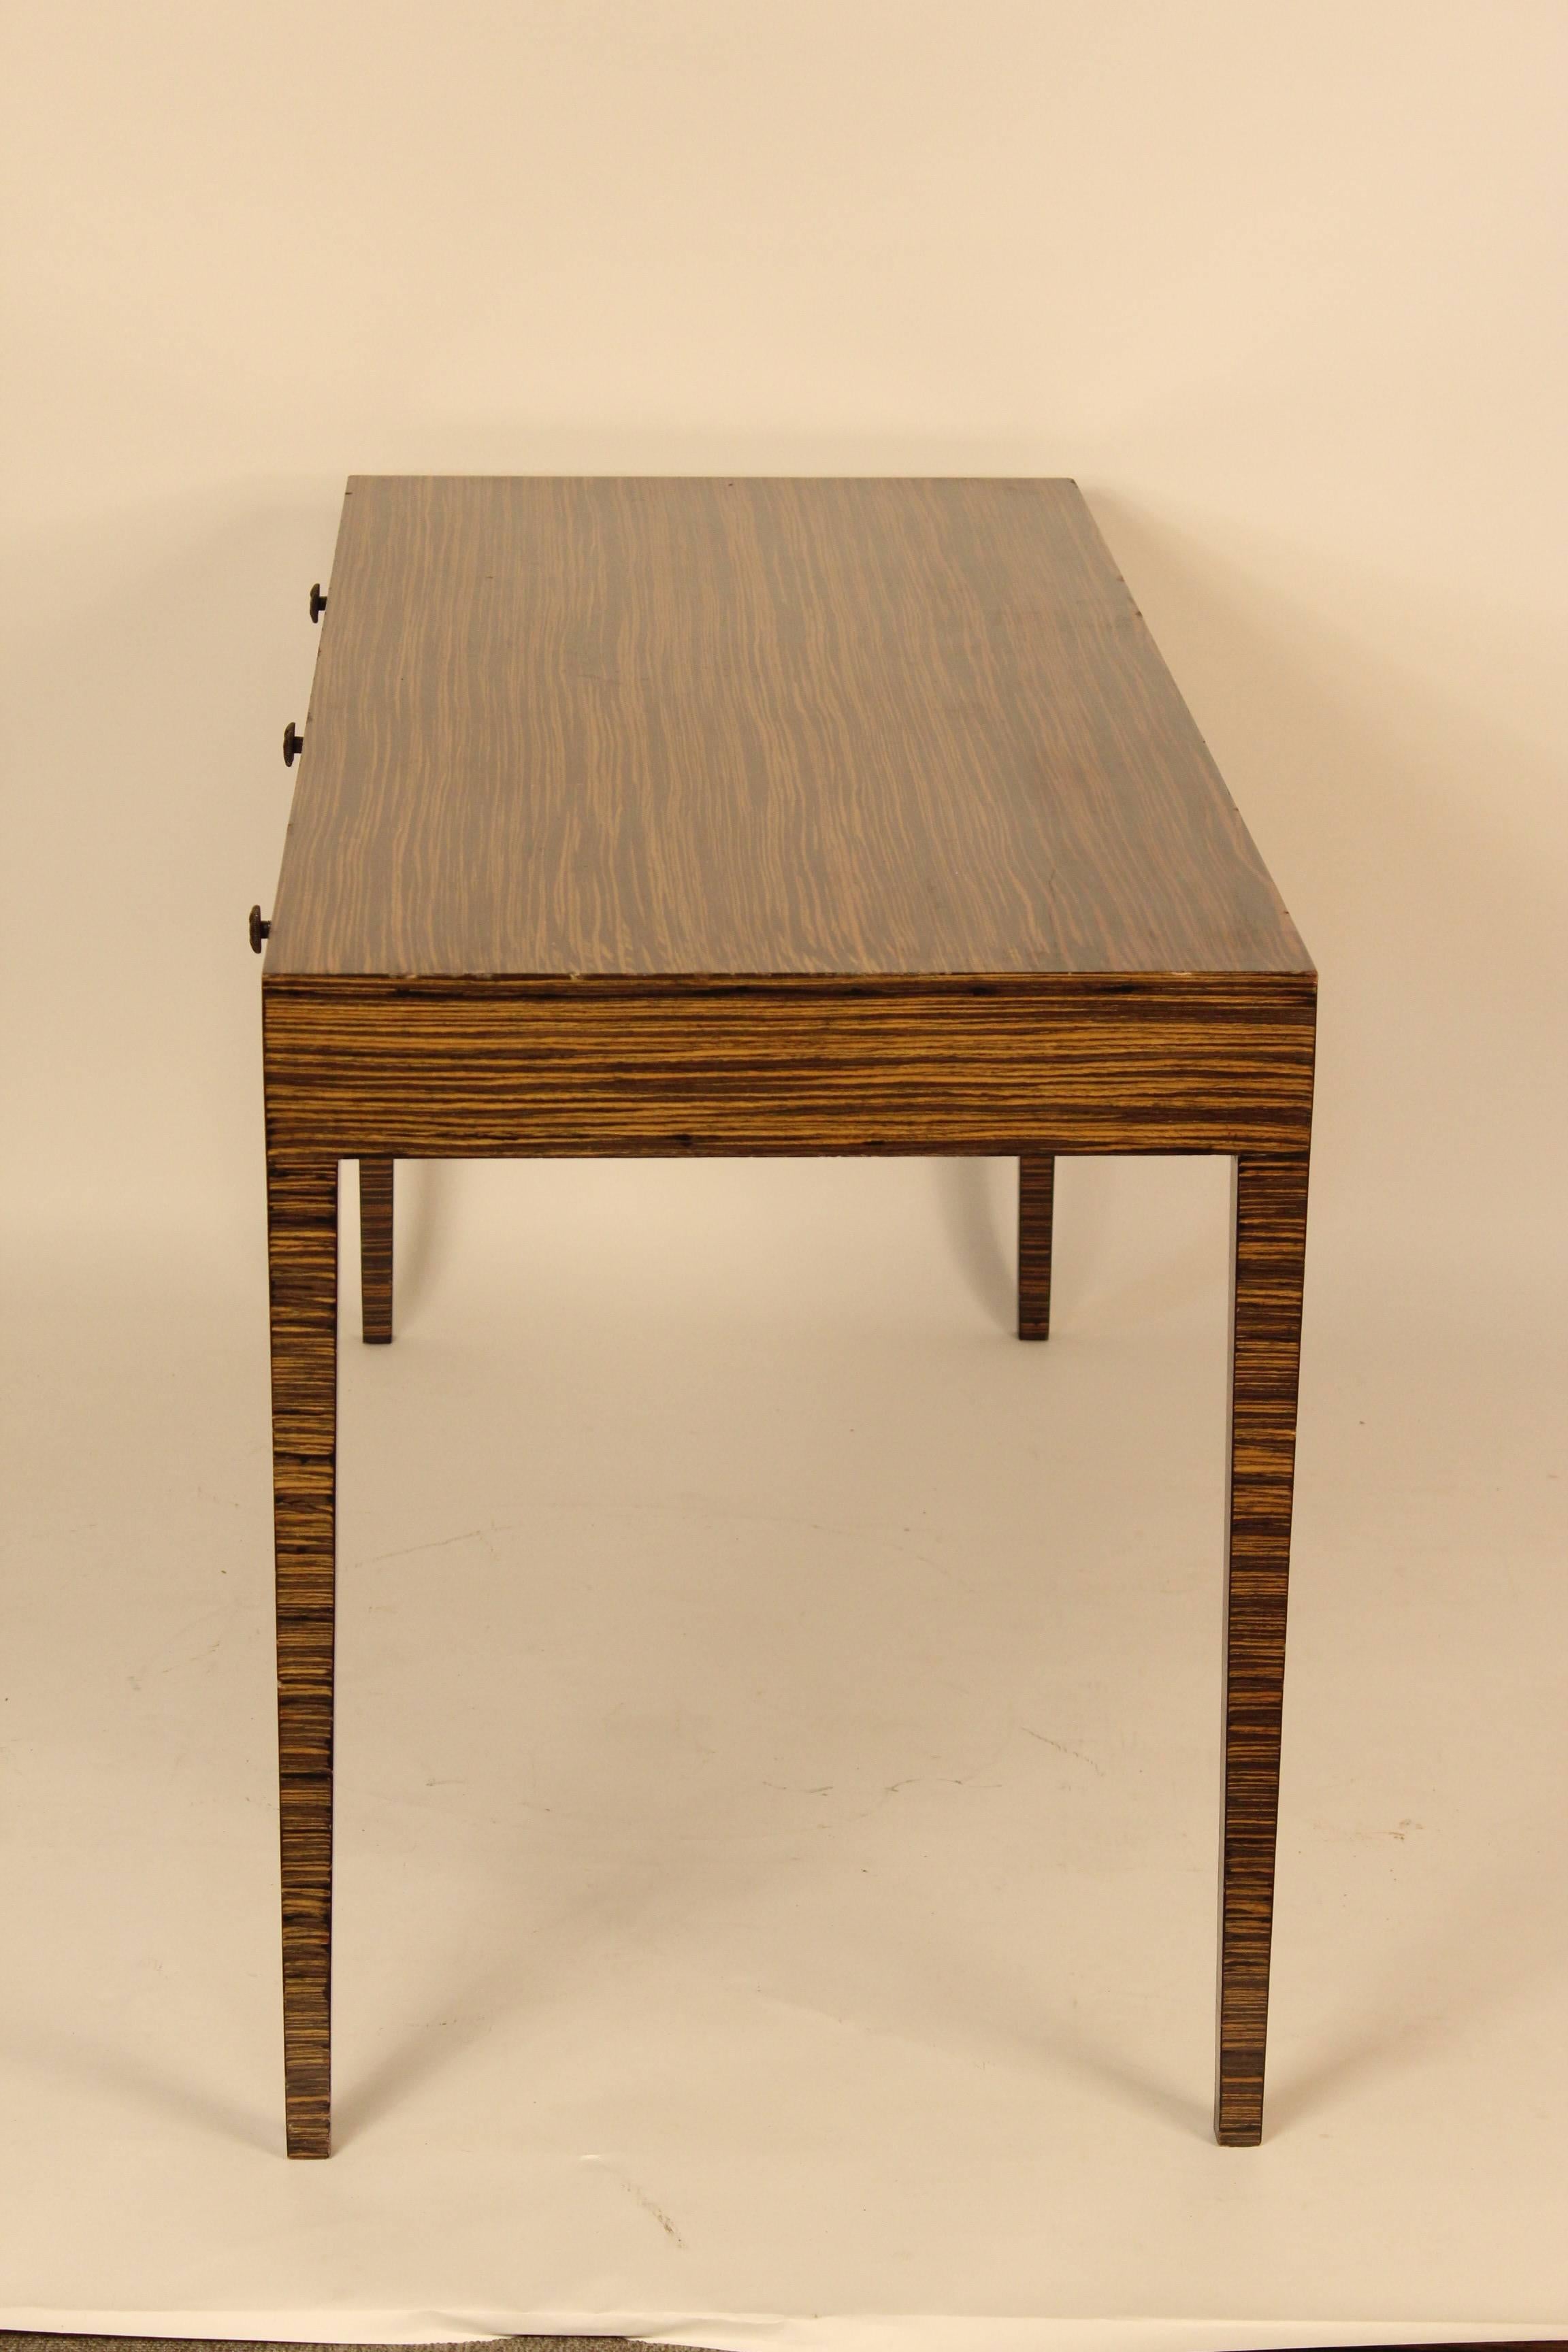 Zebra wood and faux shagreen Mid-Century Modern style desk, circa 1990. I am not 100% sure if it is shagreen or faux shagreen so I am calling it faux shagreen.